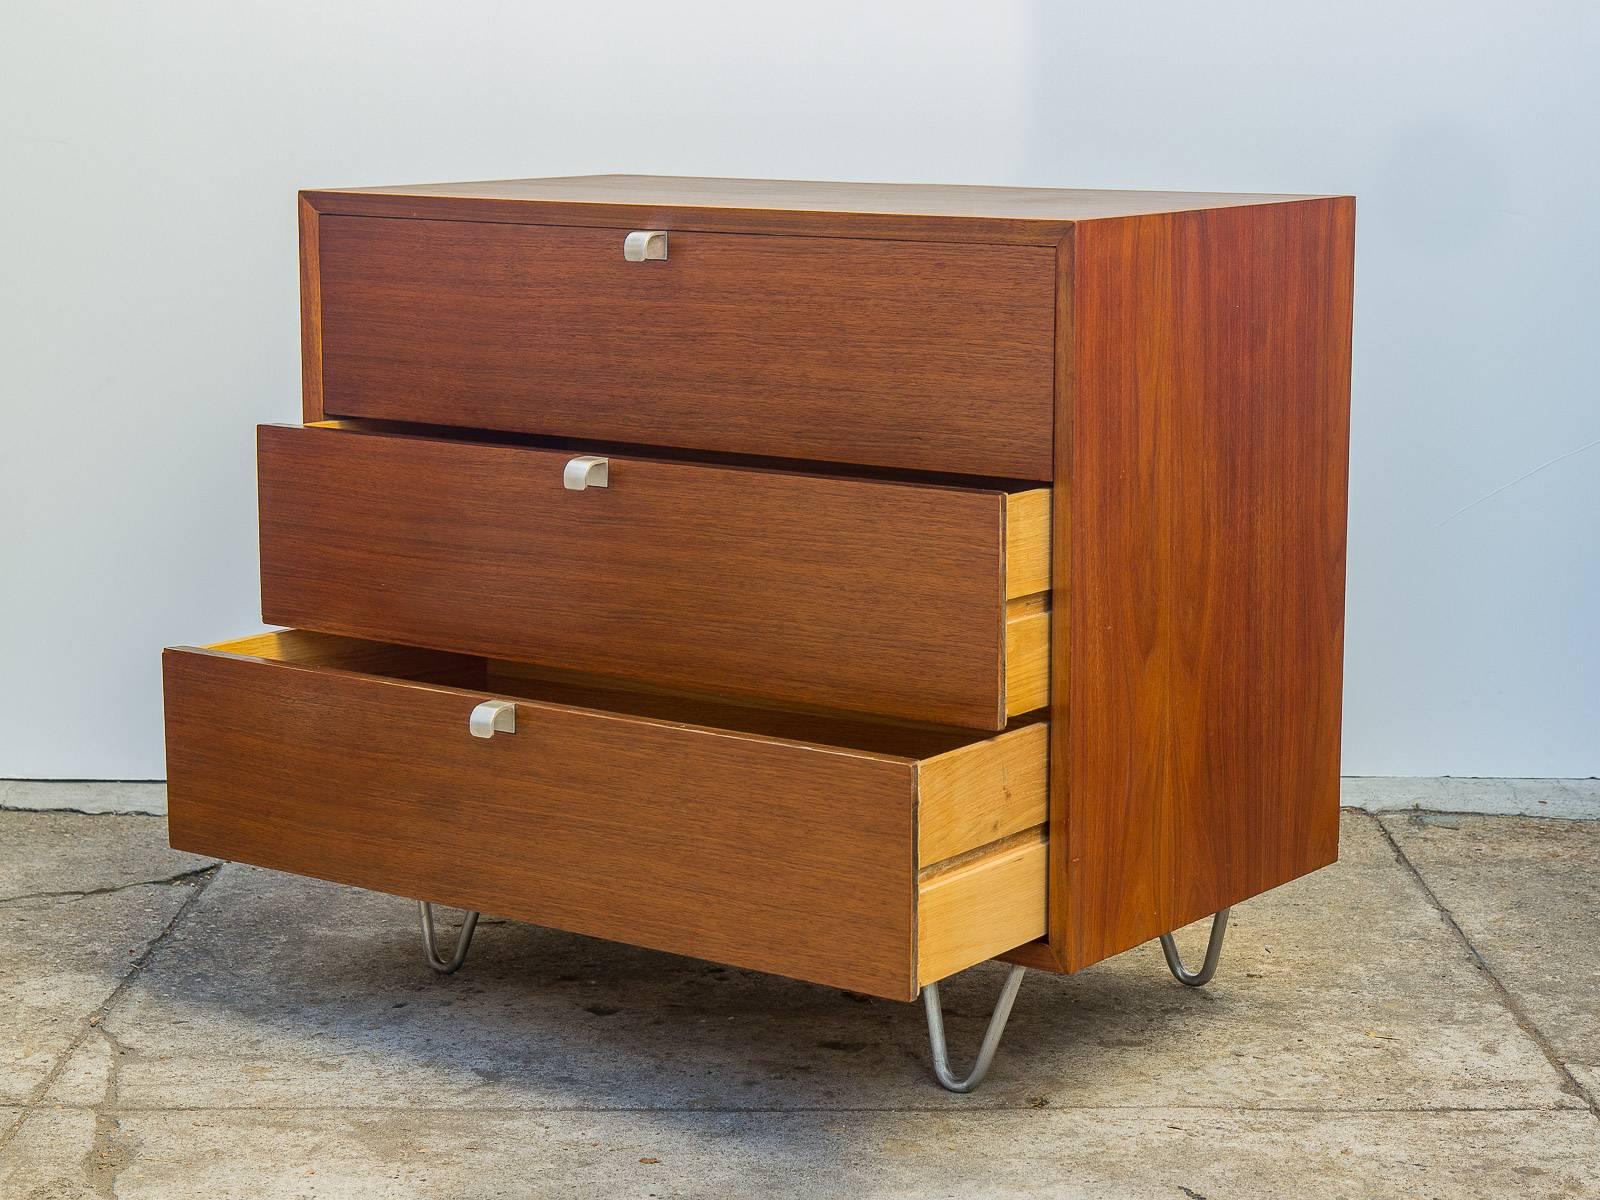 Three-drawer walnut dresser by George Nelson for Herman Miller. Staunch dresser dates from the 1950s and has been professionally restored. Aluminum J-pull handles and hairpin legs accent the modestly sized walnut body. Top drawer features three